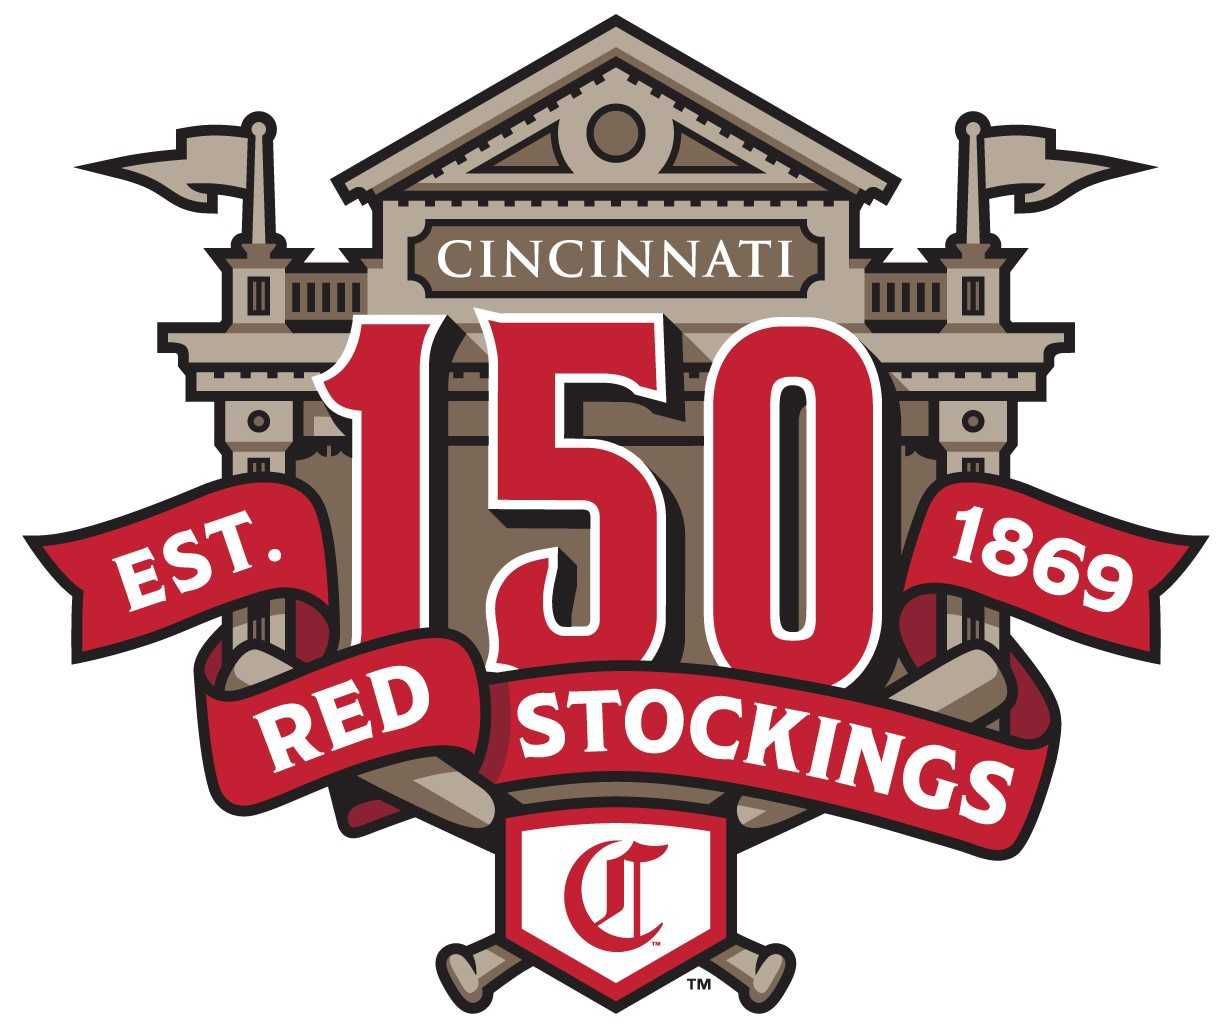 Cincinnati Reds - Pick up your 150th anniversary merchandise exclusively  for a limited time in the Reds Team Shop at Great American Ball Park.